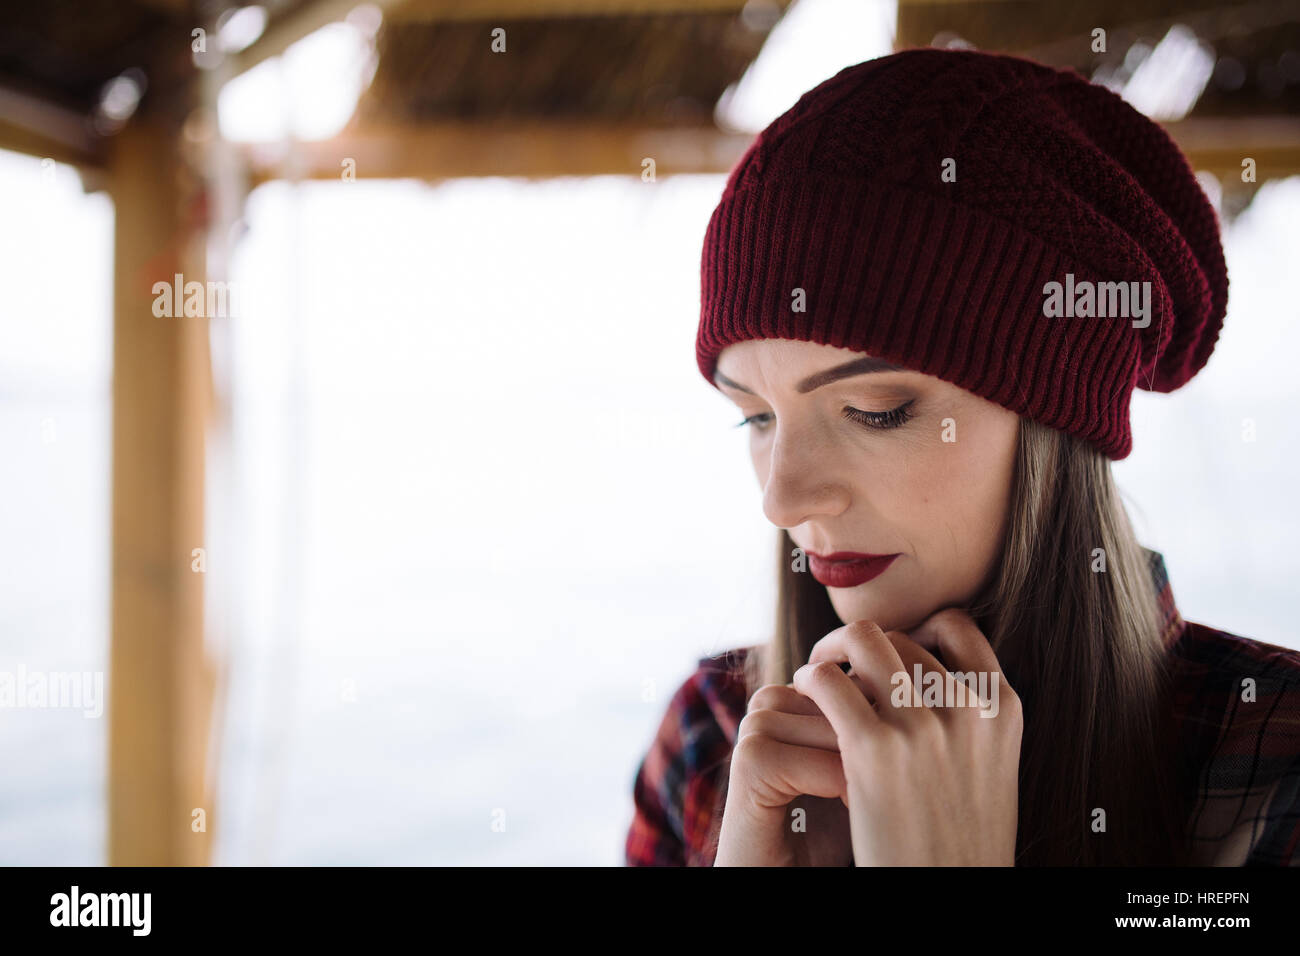 sad young woman in burgundy hat Stock Photo